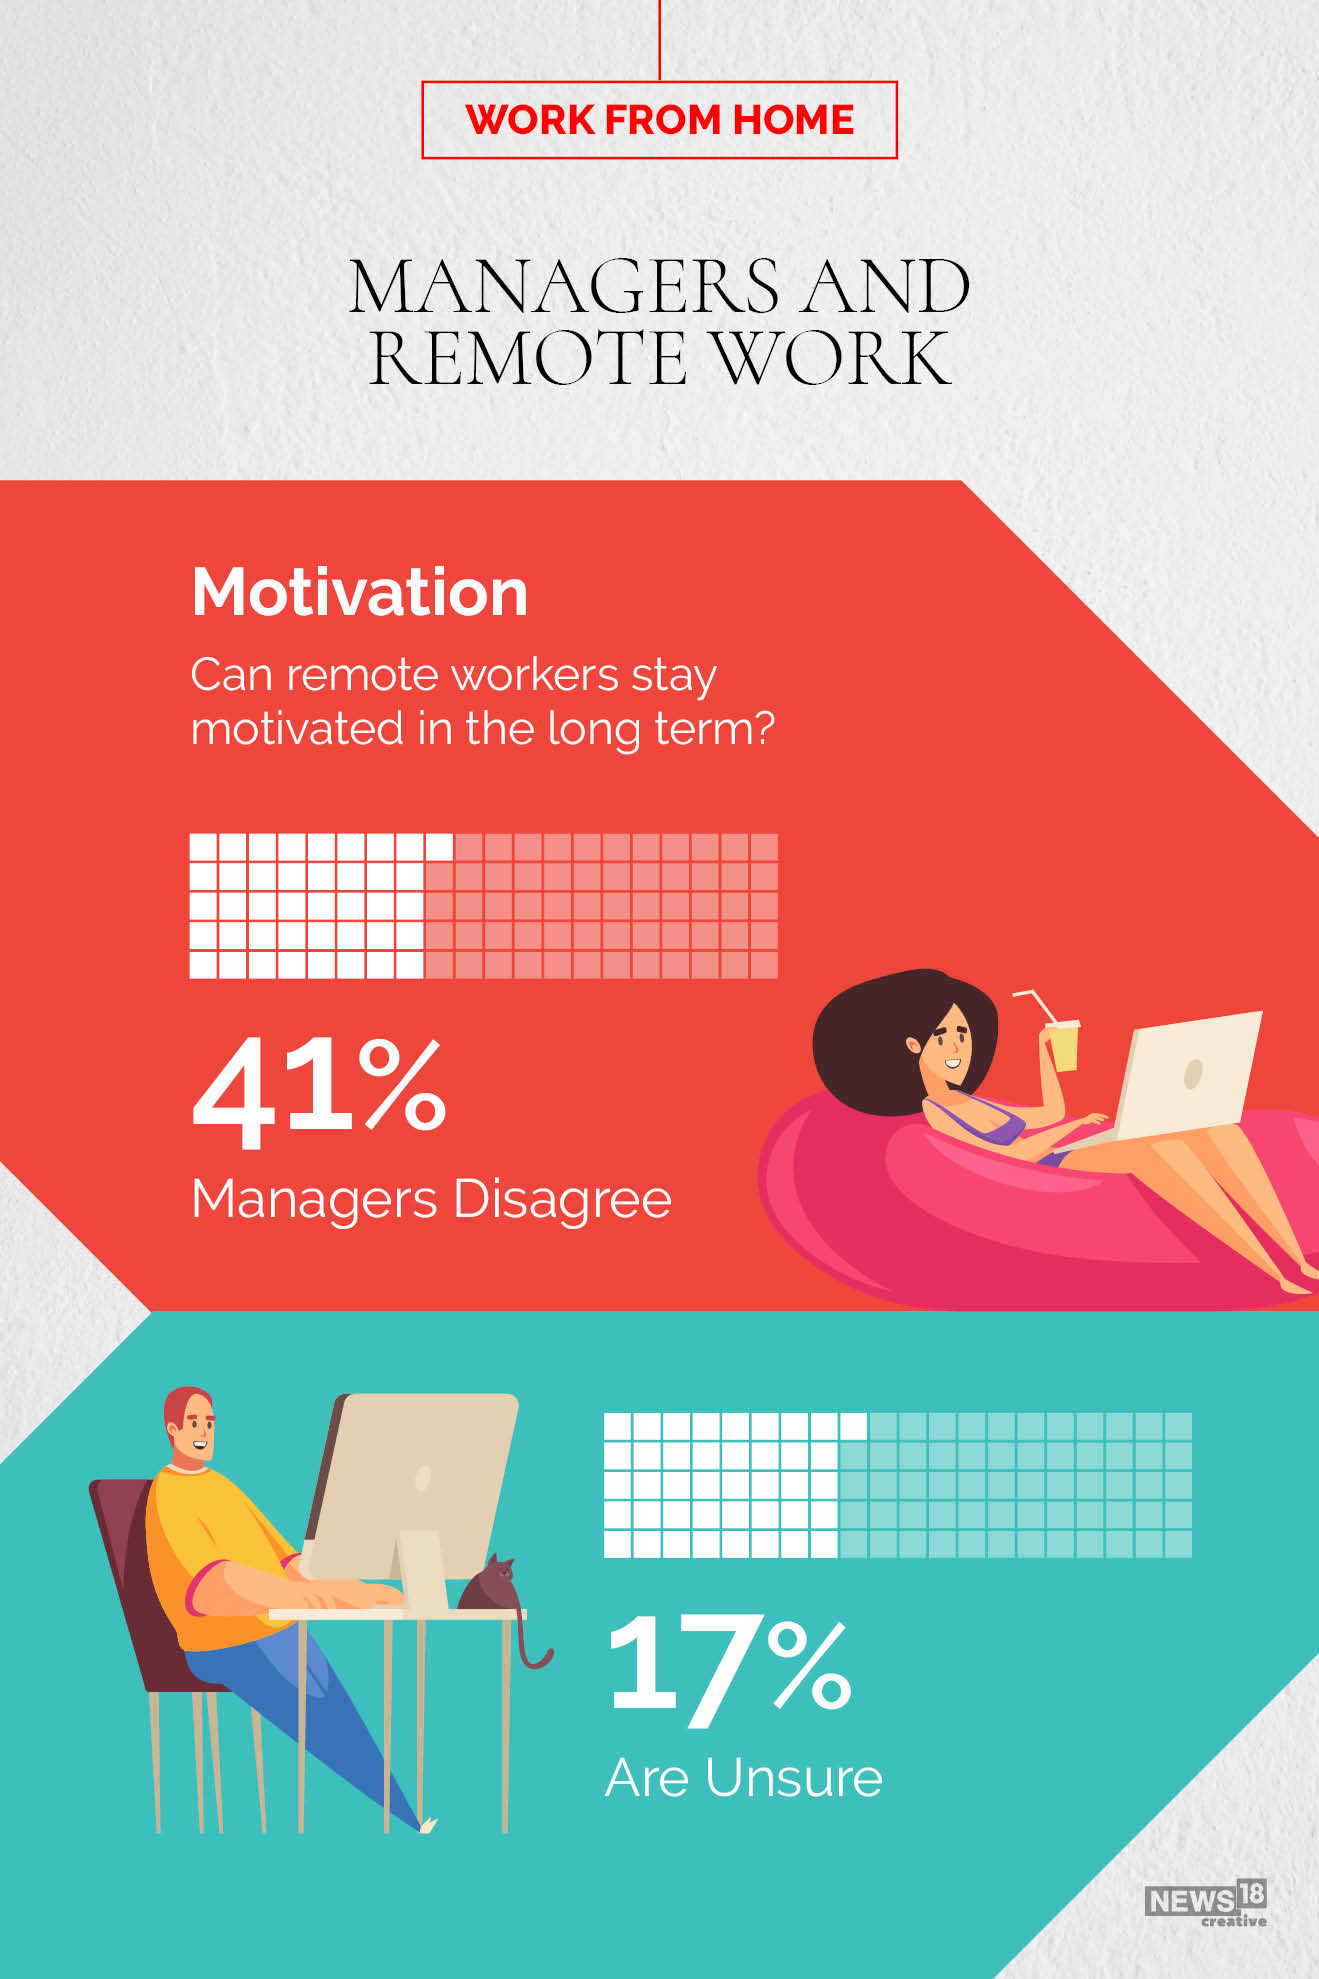 Work from home: More male managers mistrust employees than female